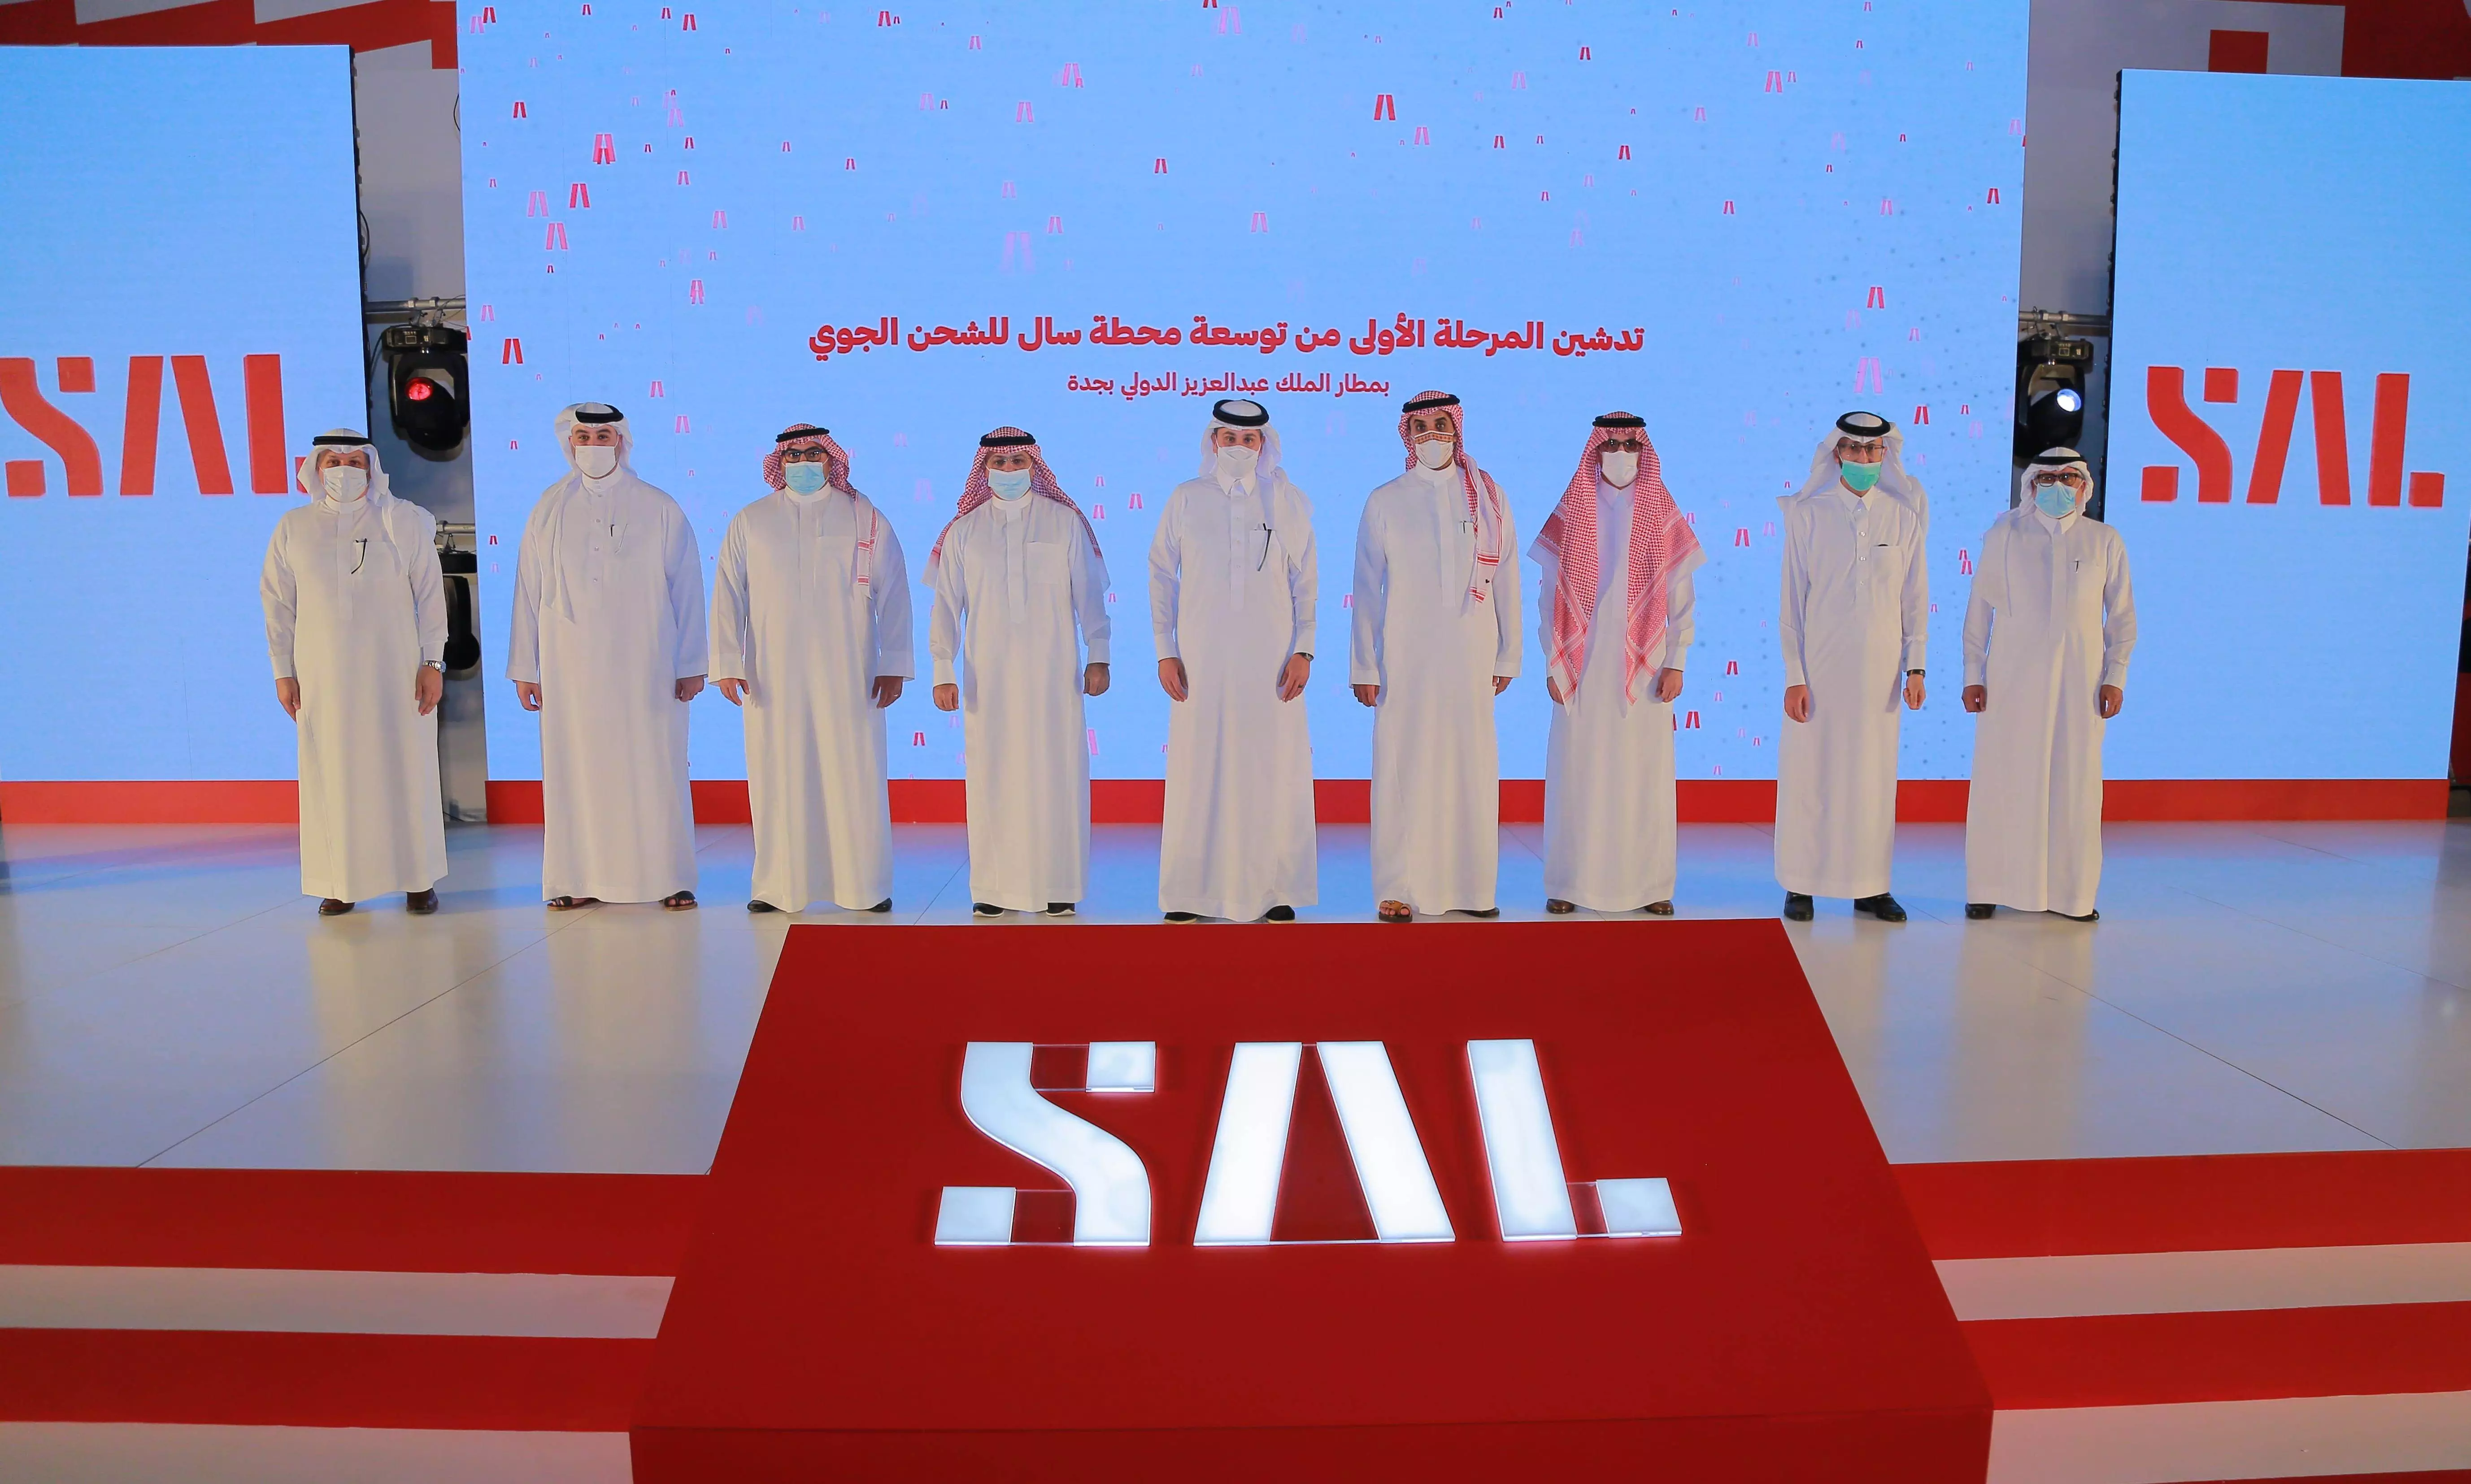 Honorable patronage of His Excellency Eng. Saleh Al-Jasser and Minister of Transport & Logistics launched the station